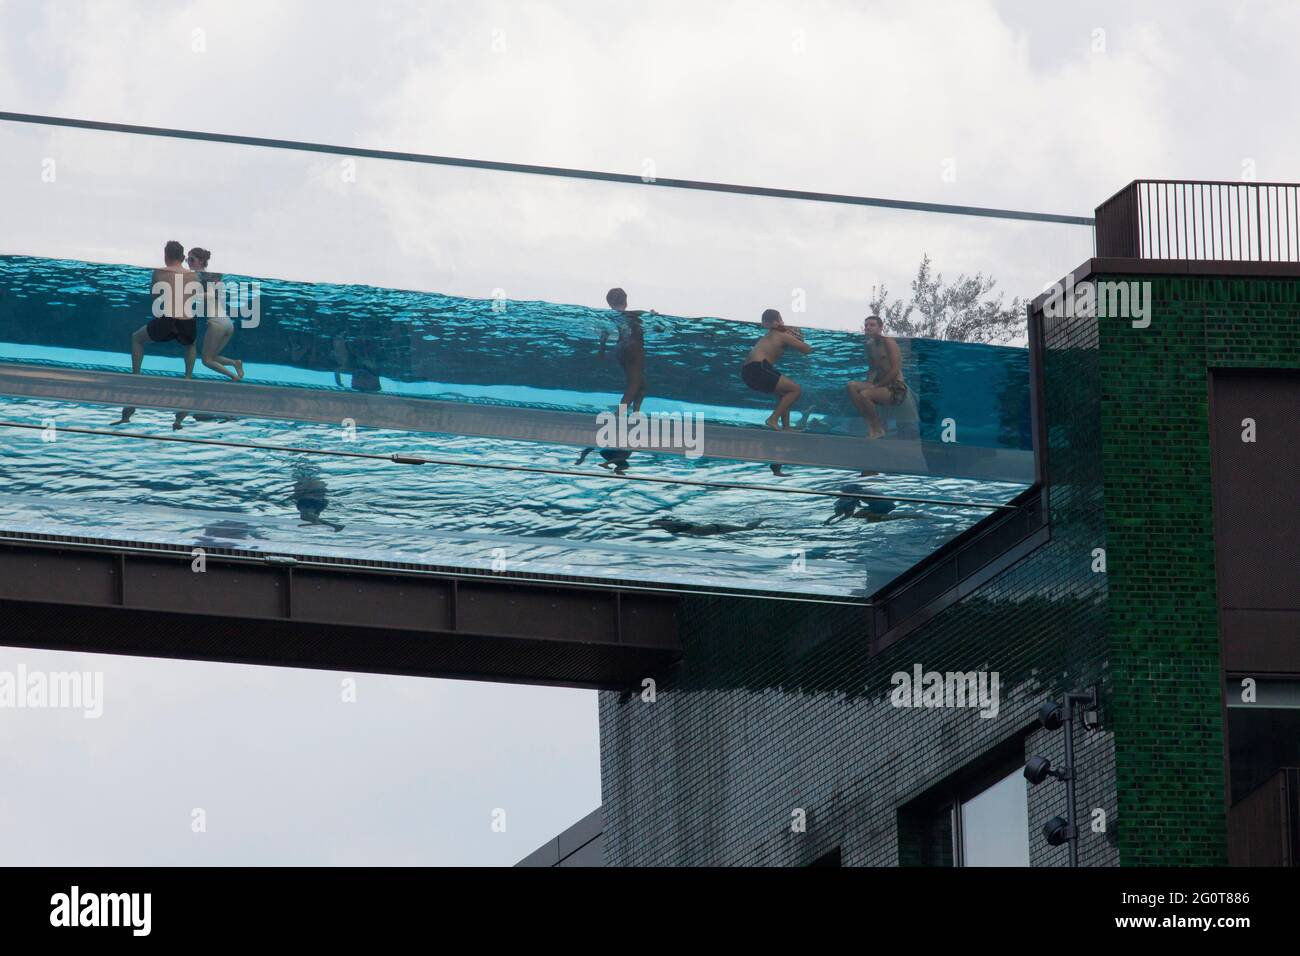 London, UK, 2 June 2021: At Embassy Gardens, in the Nine Elms area around the American Embassy, residents of luxury apartments have access to the Sky Pool, 115 feet above the ground. Linking two buildings with a completely clear structure, swimmers may have an air of exclusivity as a two-bedroom apartment costs over £1 million, but they have no privacy. Anna Watson/Alamy Stock Photo